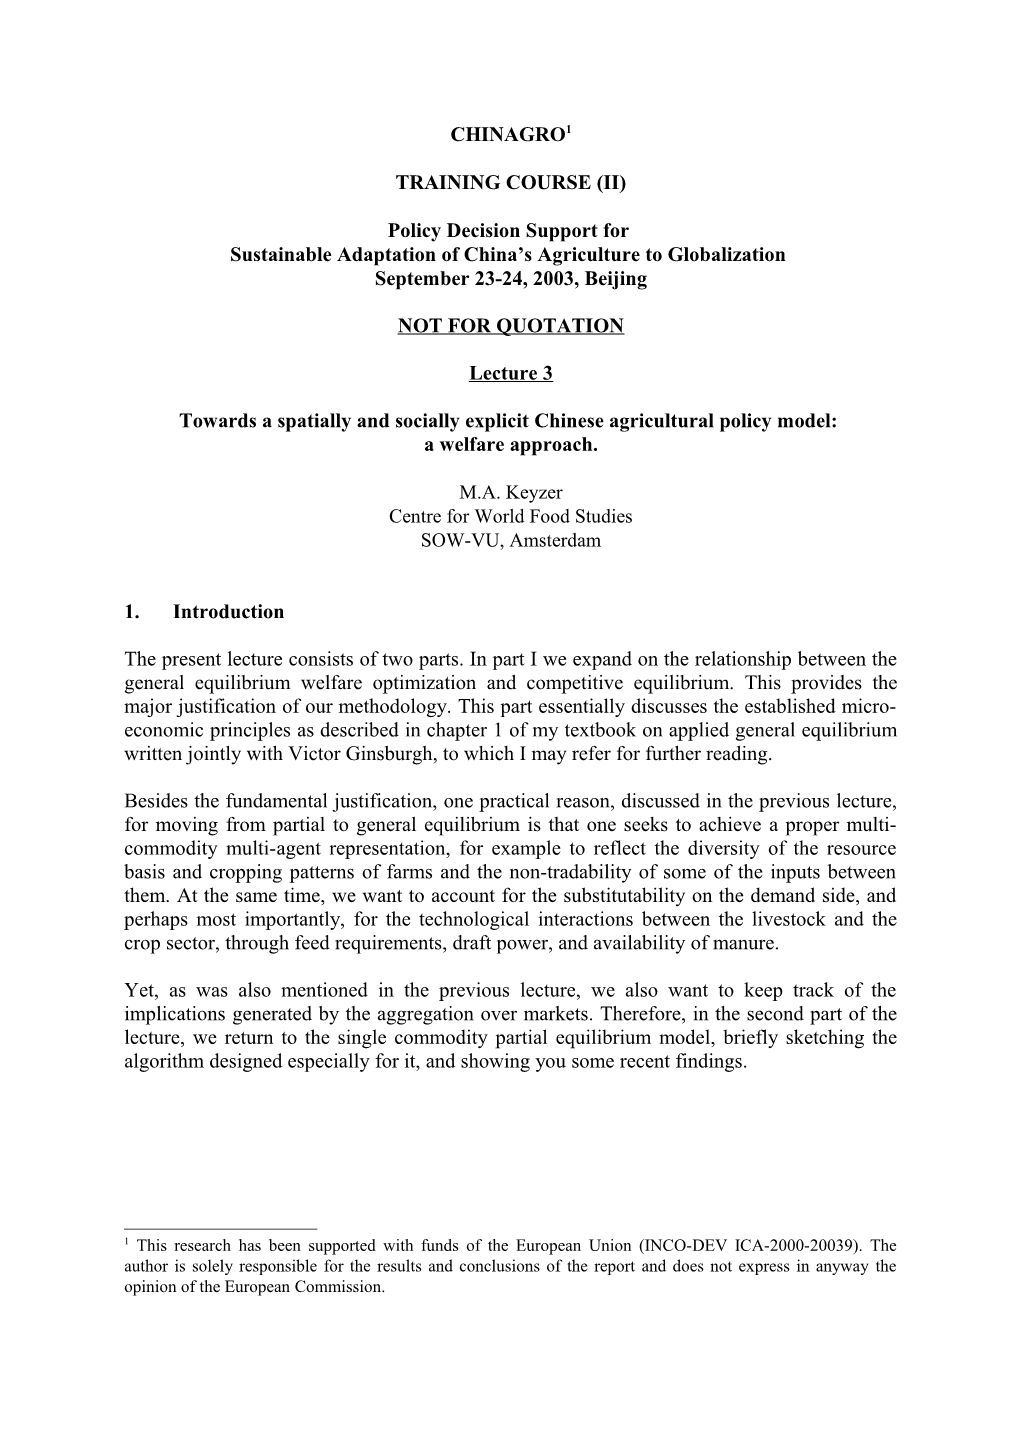 Towards a Spatially and Socially Explicit Chinese Agricultural Policy Model: a Welfare Approach